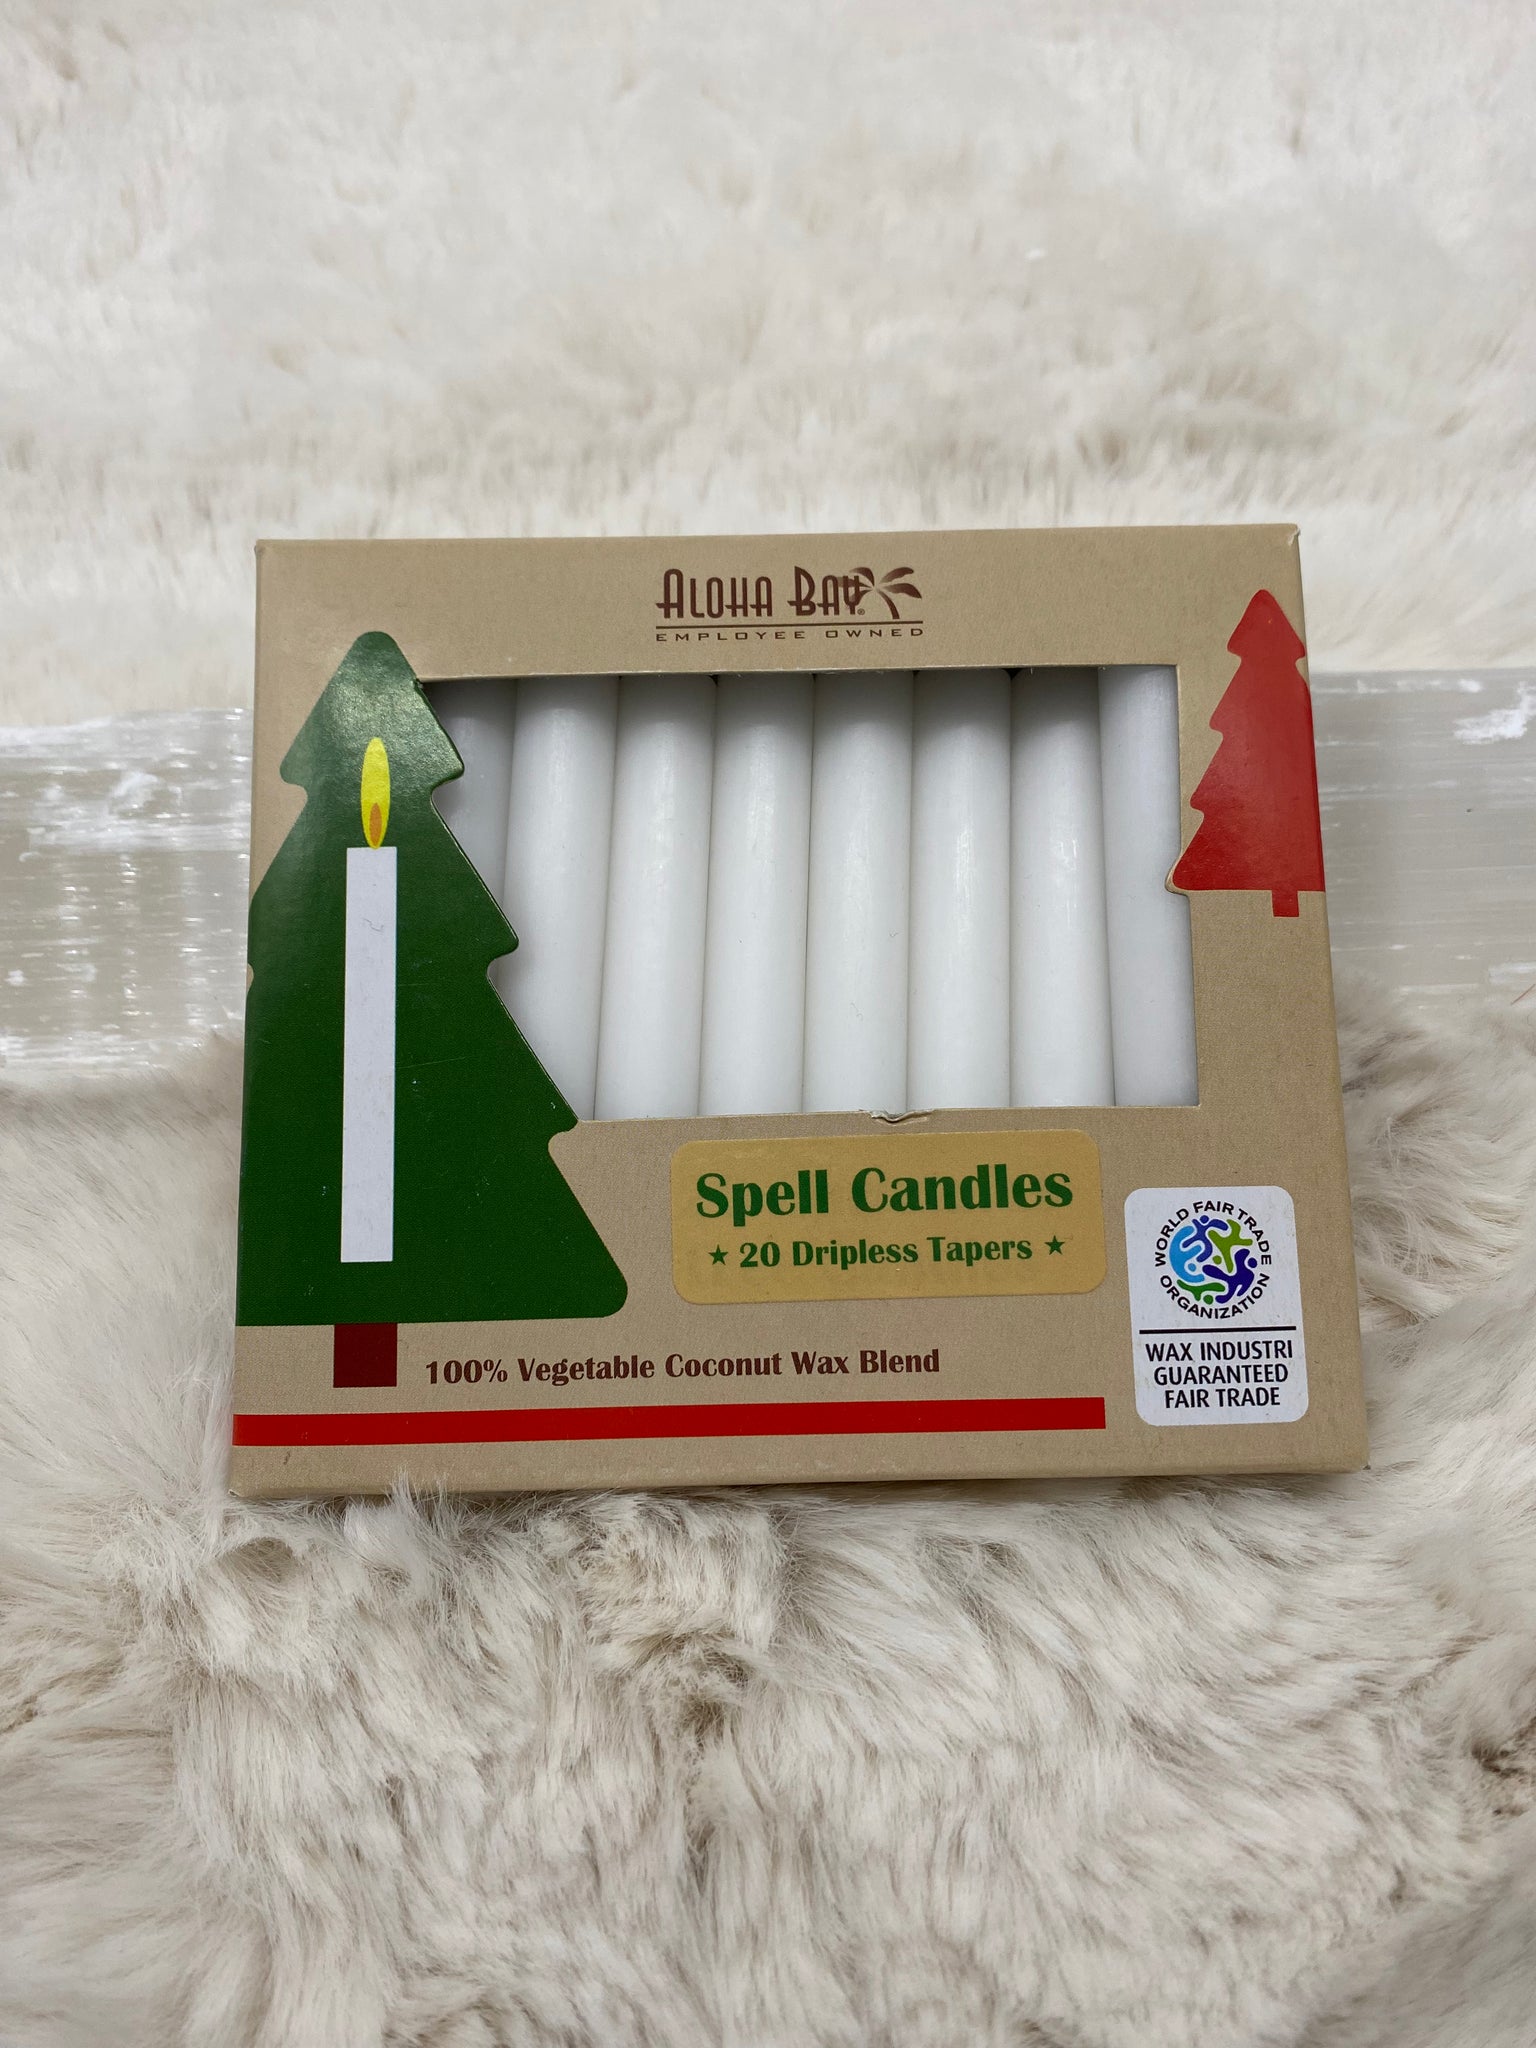 Aloha Bay Spell Candle Pack